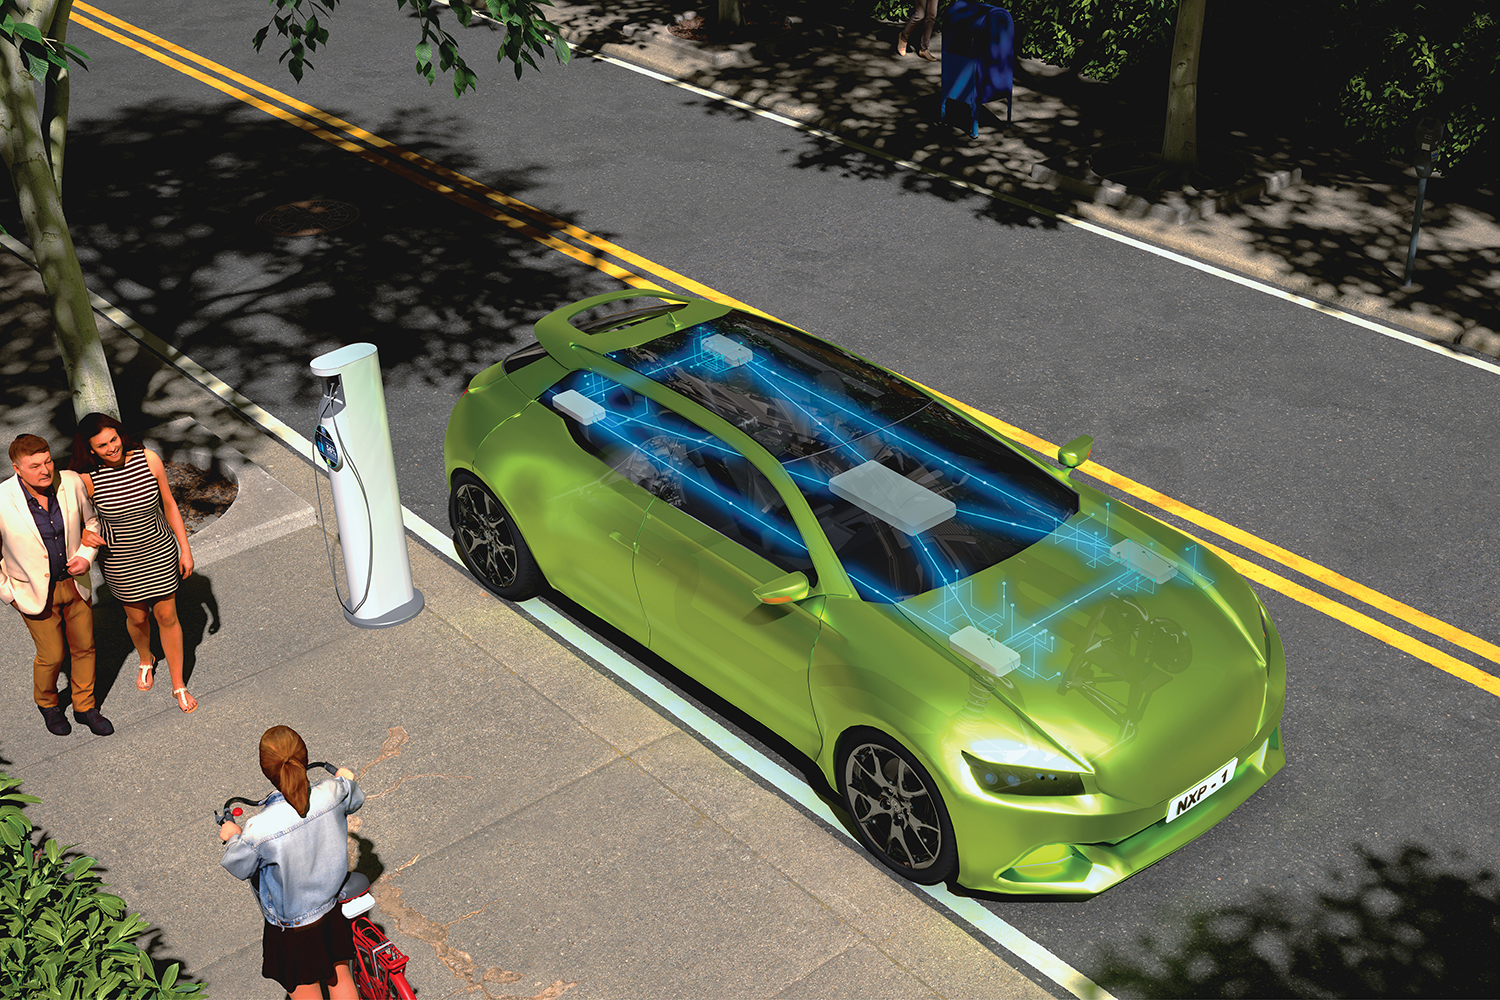 real-time data future innovation processing automotive (image credit: NXP)